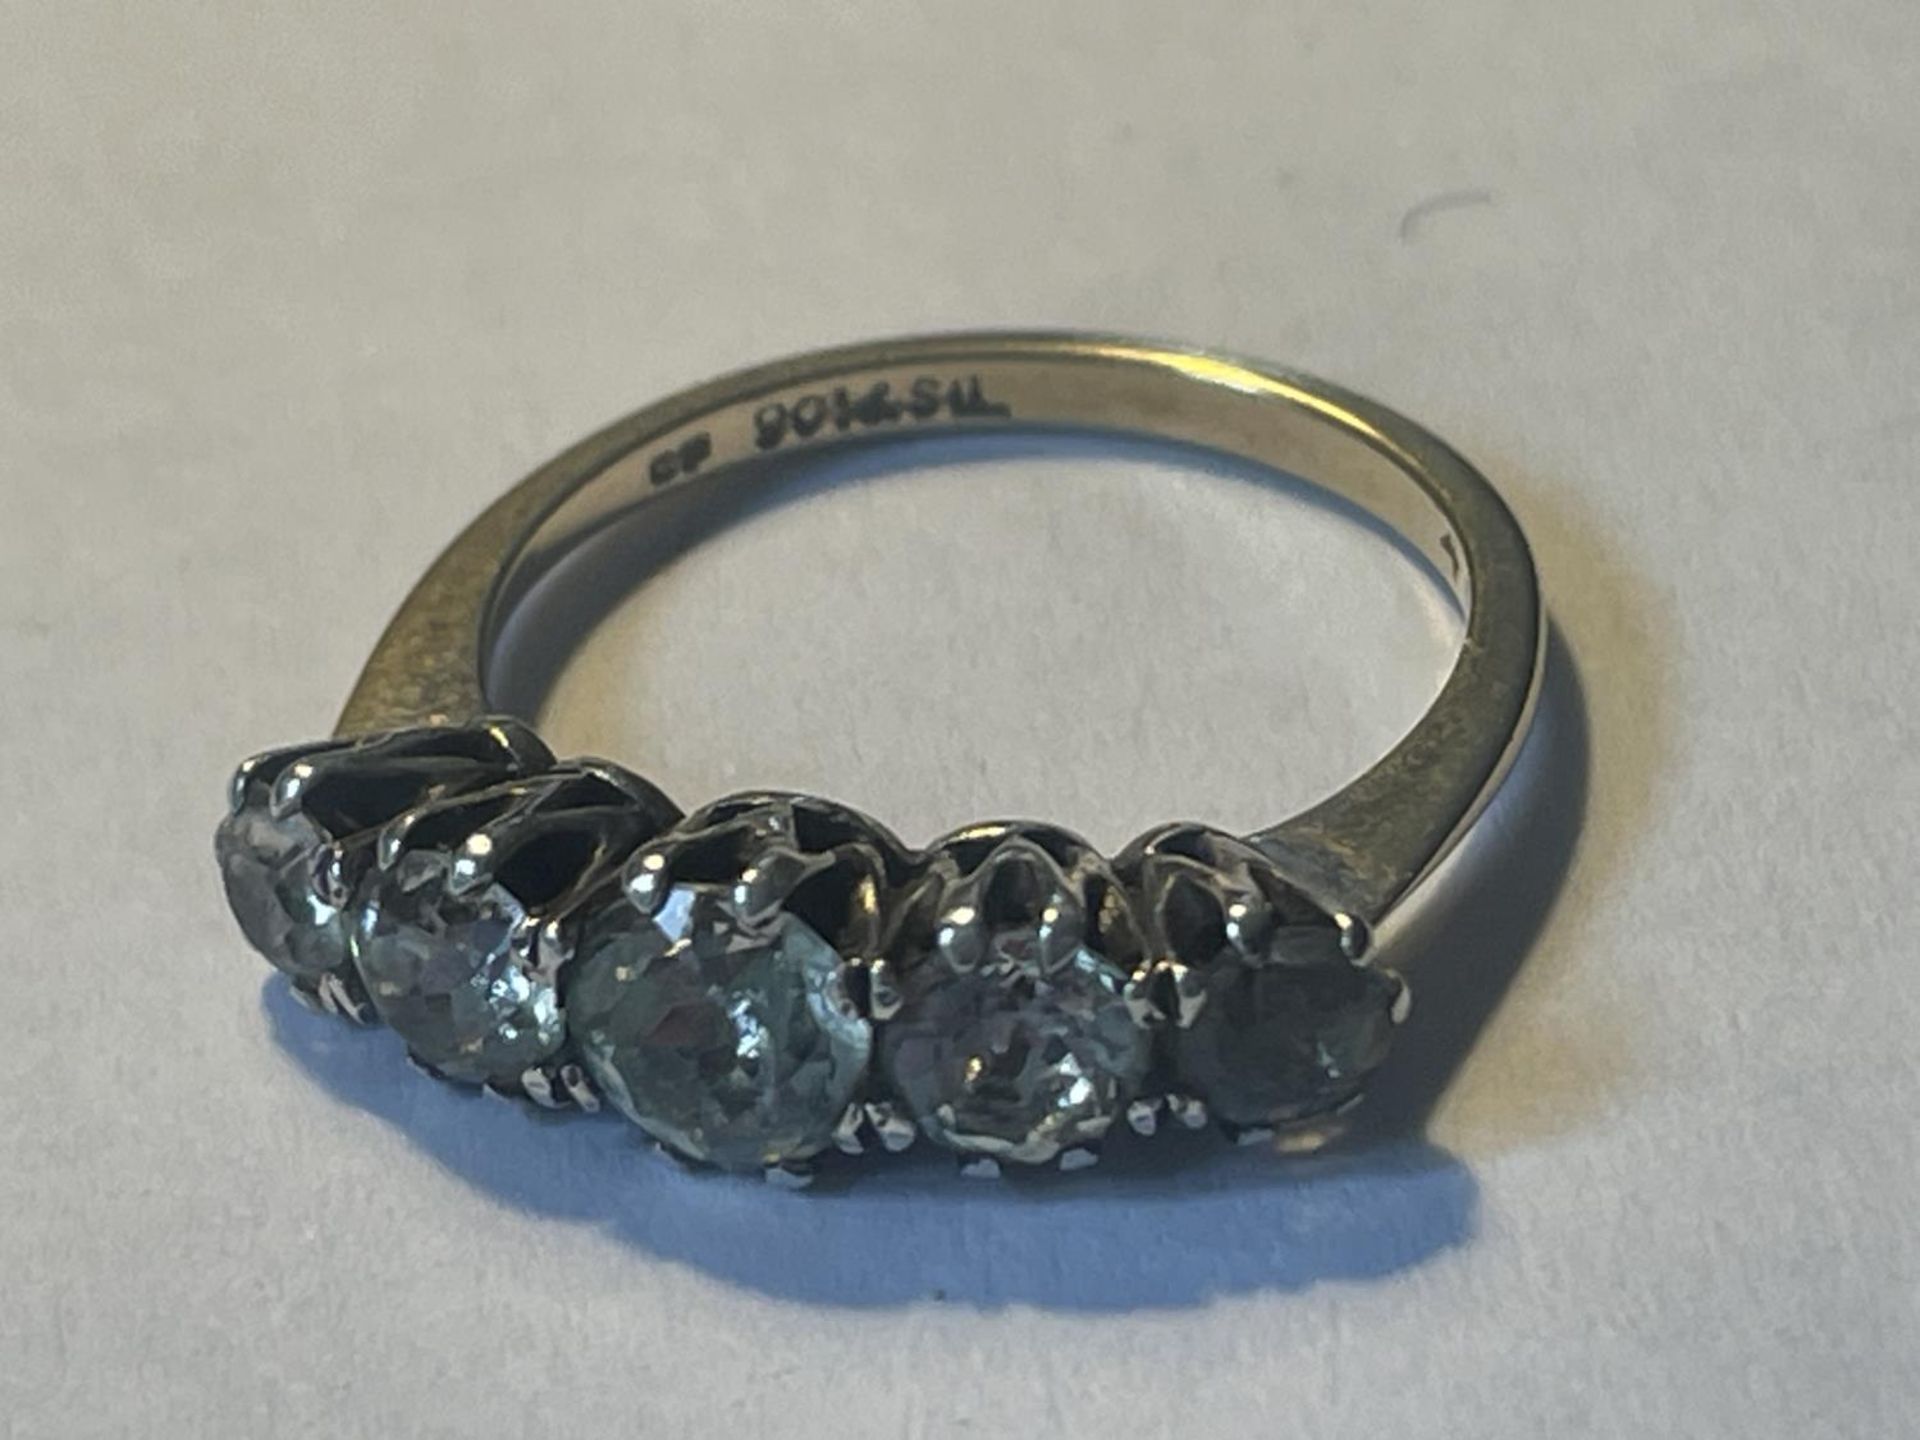 A SILVER AND 9 CARAT GOLD RING WITH FOVE IN LINE CLEAR STONES IN A PRESENTATION BOX - Image 2 of 4